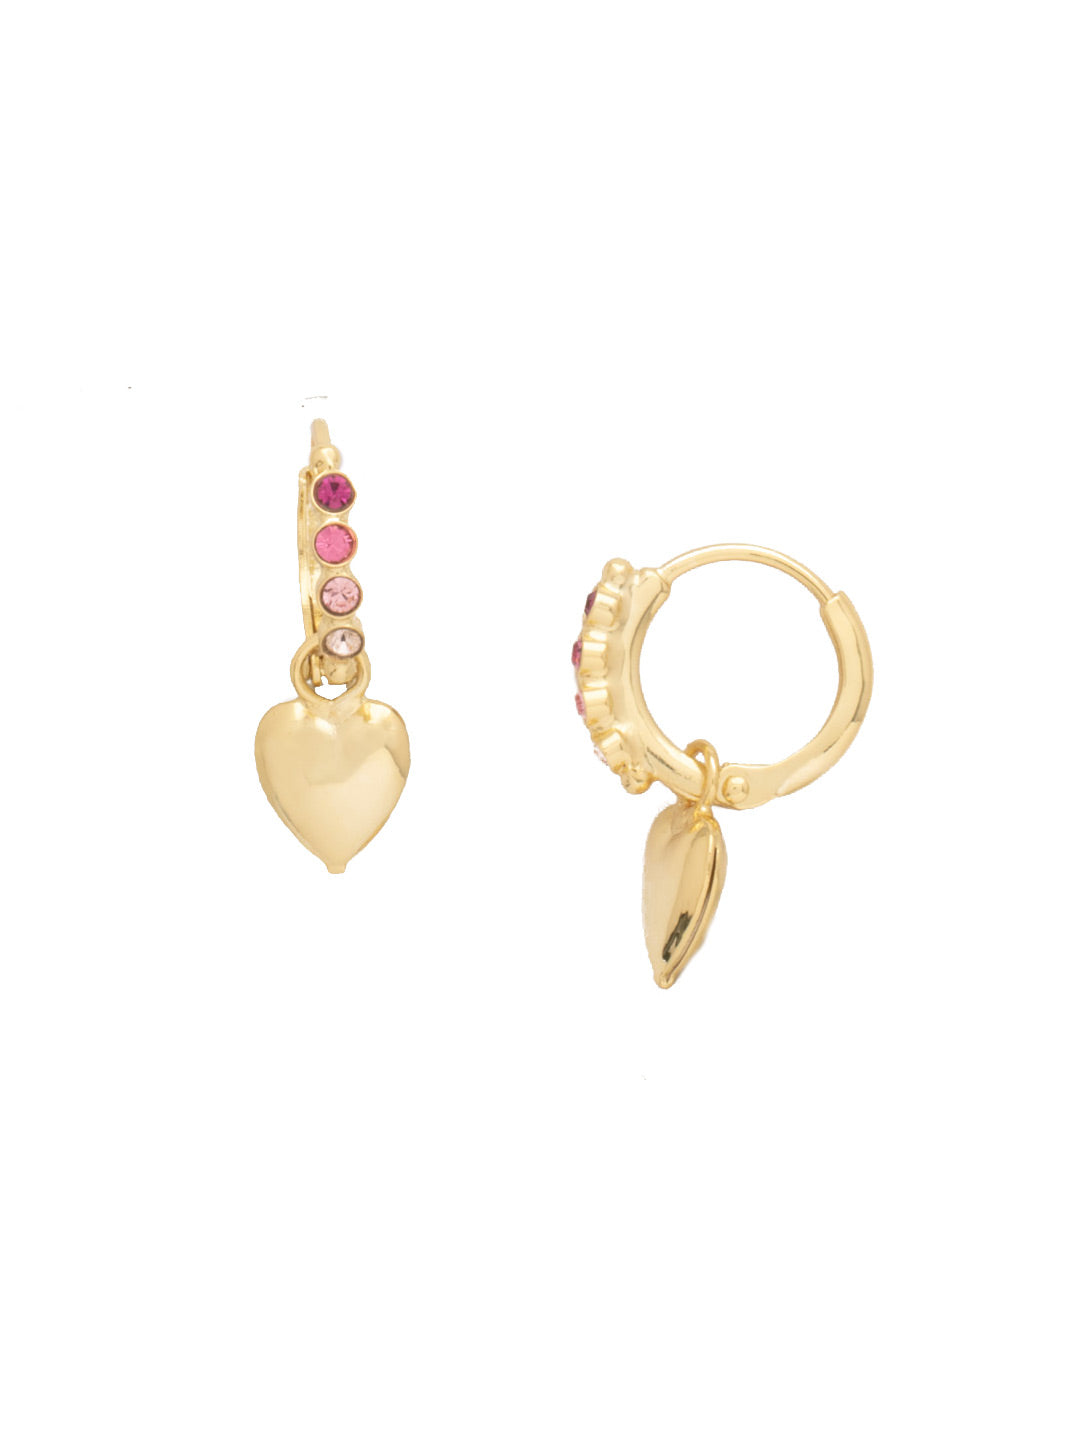 Mini Heart Embellished Huggie Hoop Earrings - EFN16BGBFL - <p>The Mini Heart Embellished Huggie Hoop Earrings feature a single metal heart charm dangling from a tiny crystal-embellished huggie hoop. From Sorrelli's Big Flirt collection in our Bright Gold-tone finish.</p>